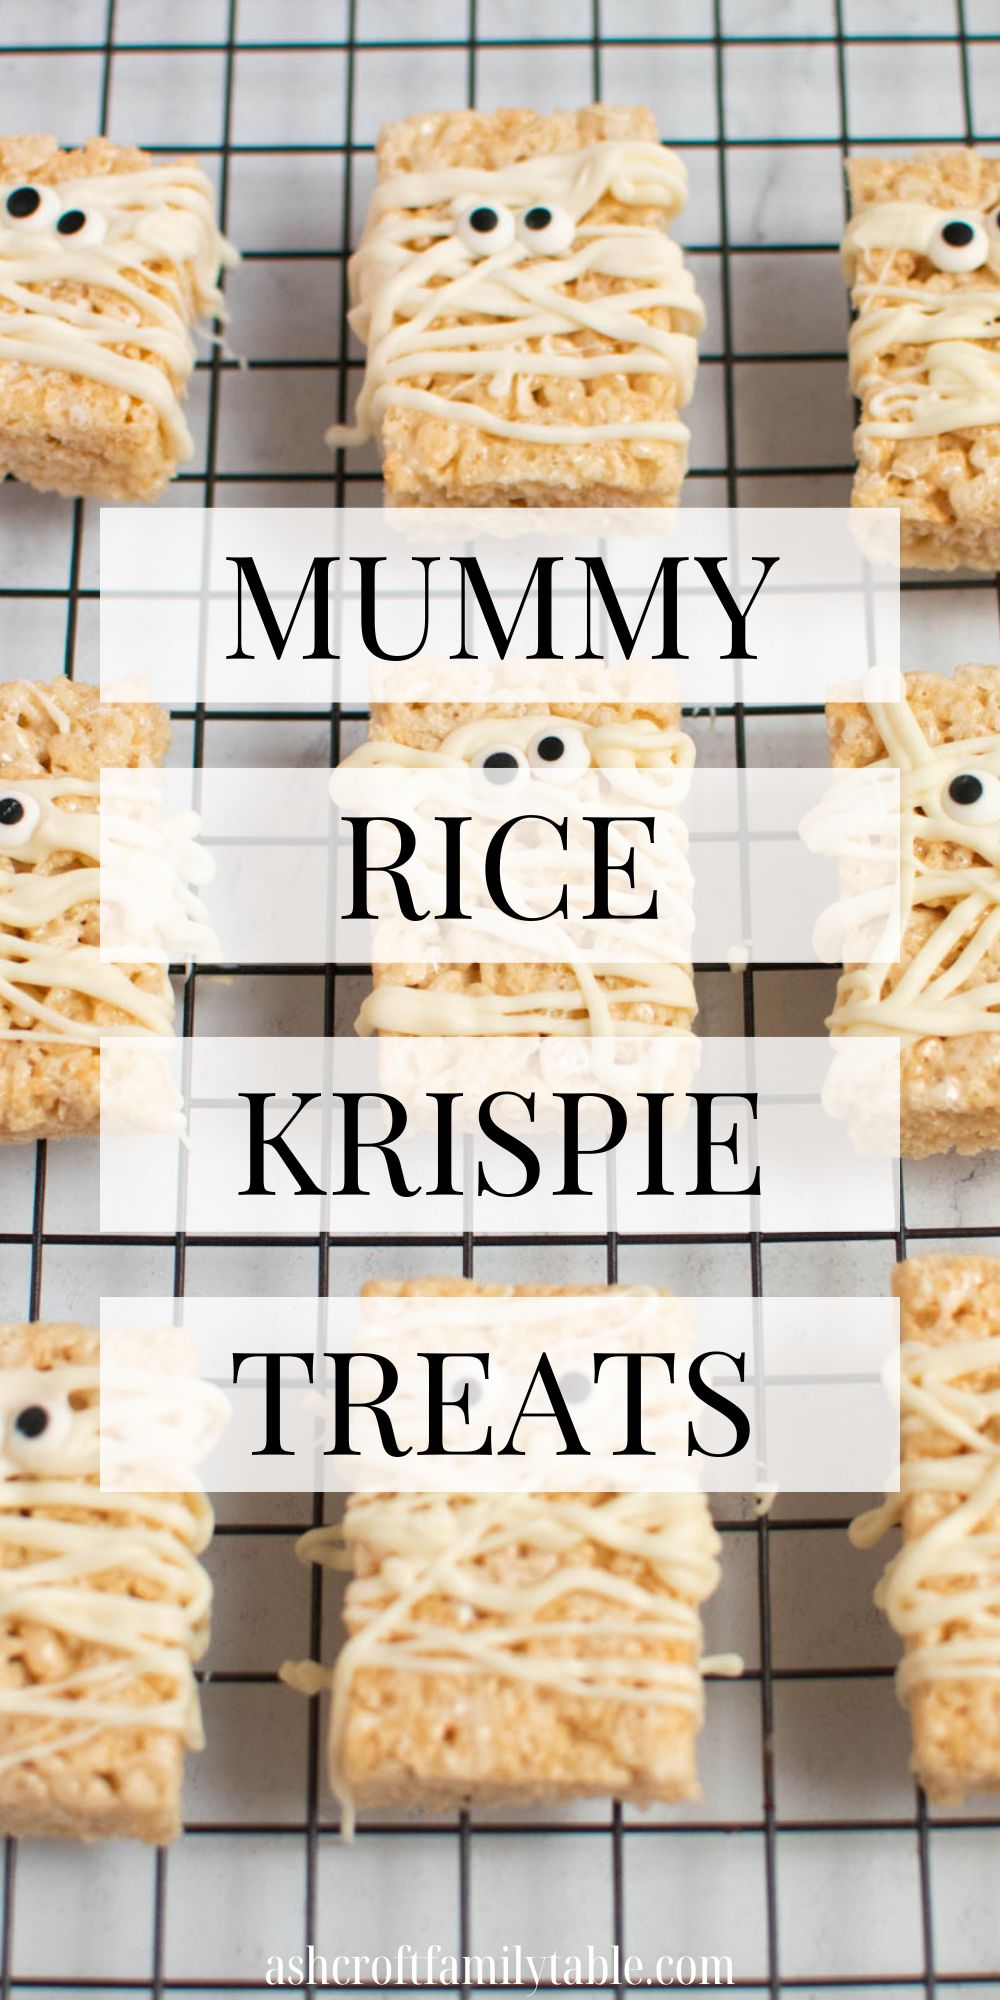 Pinterest graphic with text and photo of mummy rice krispie treats on baking rack.